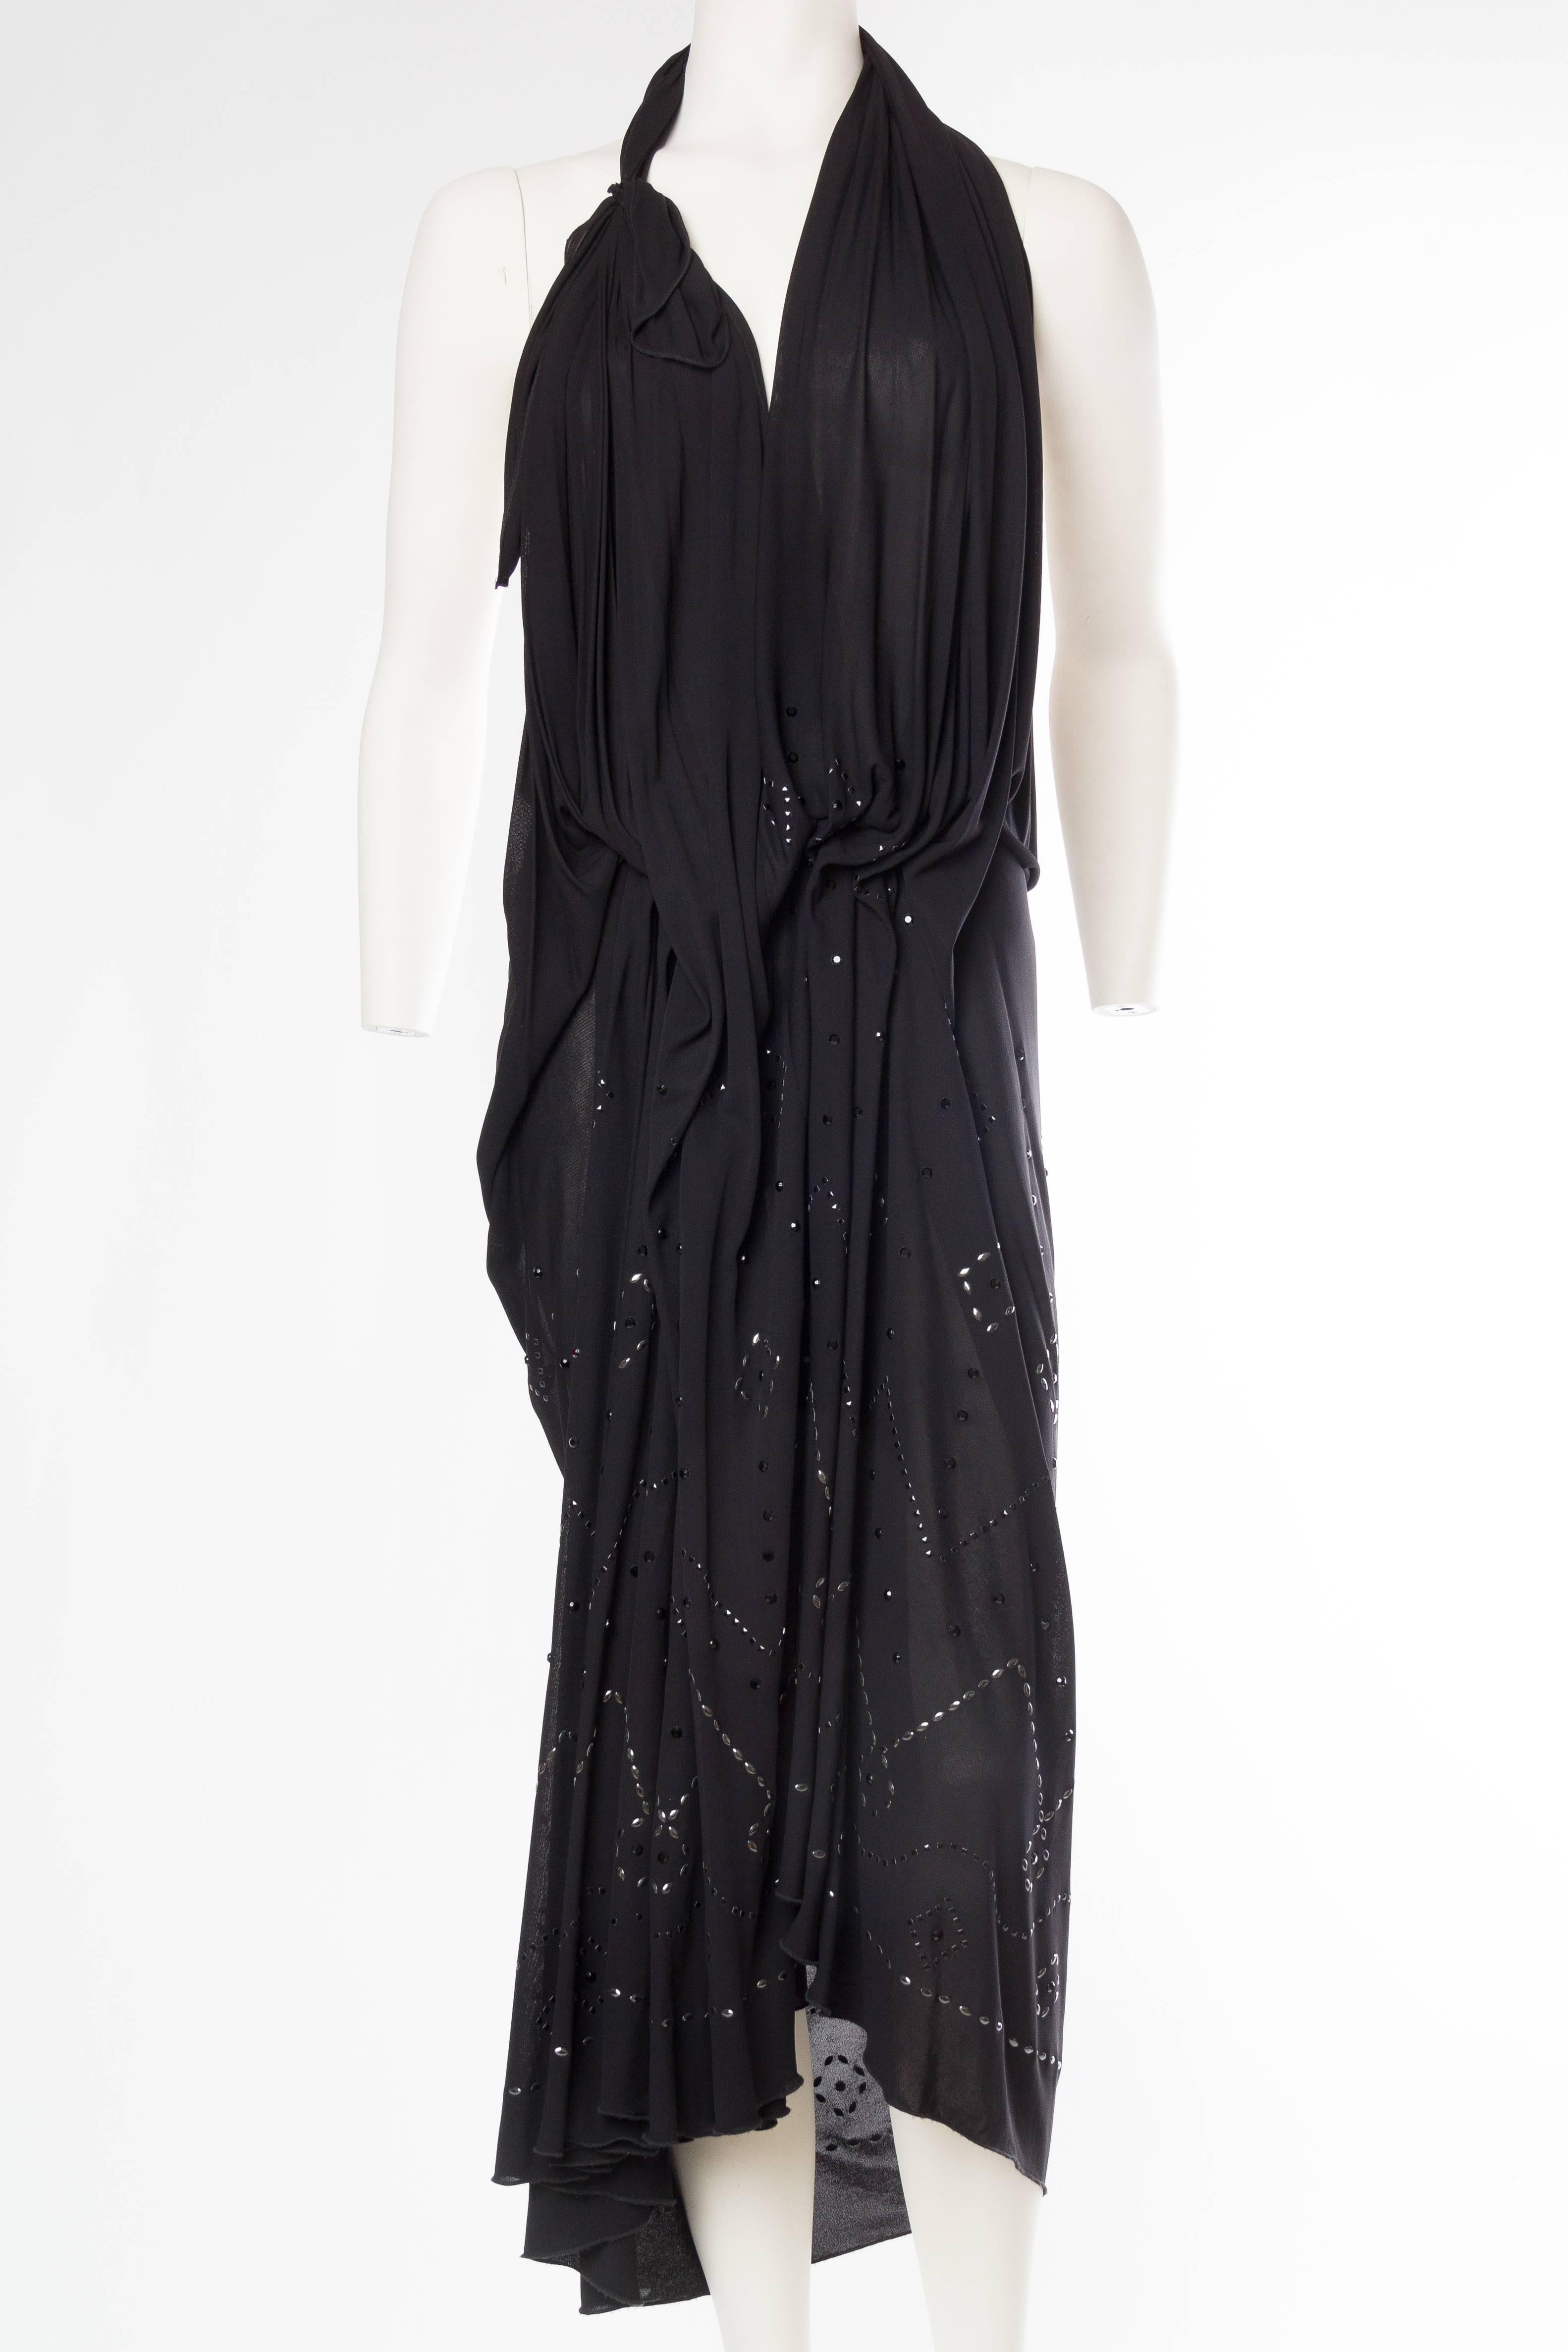 1990S MAISON MARTIN MARGIELA Black Rayon Jersey Avant Garde Draped Cocktail Dress Studded With Crystals no tag in dress